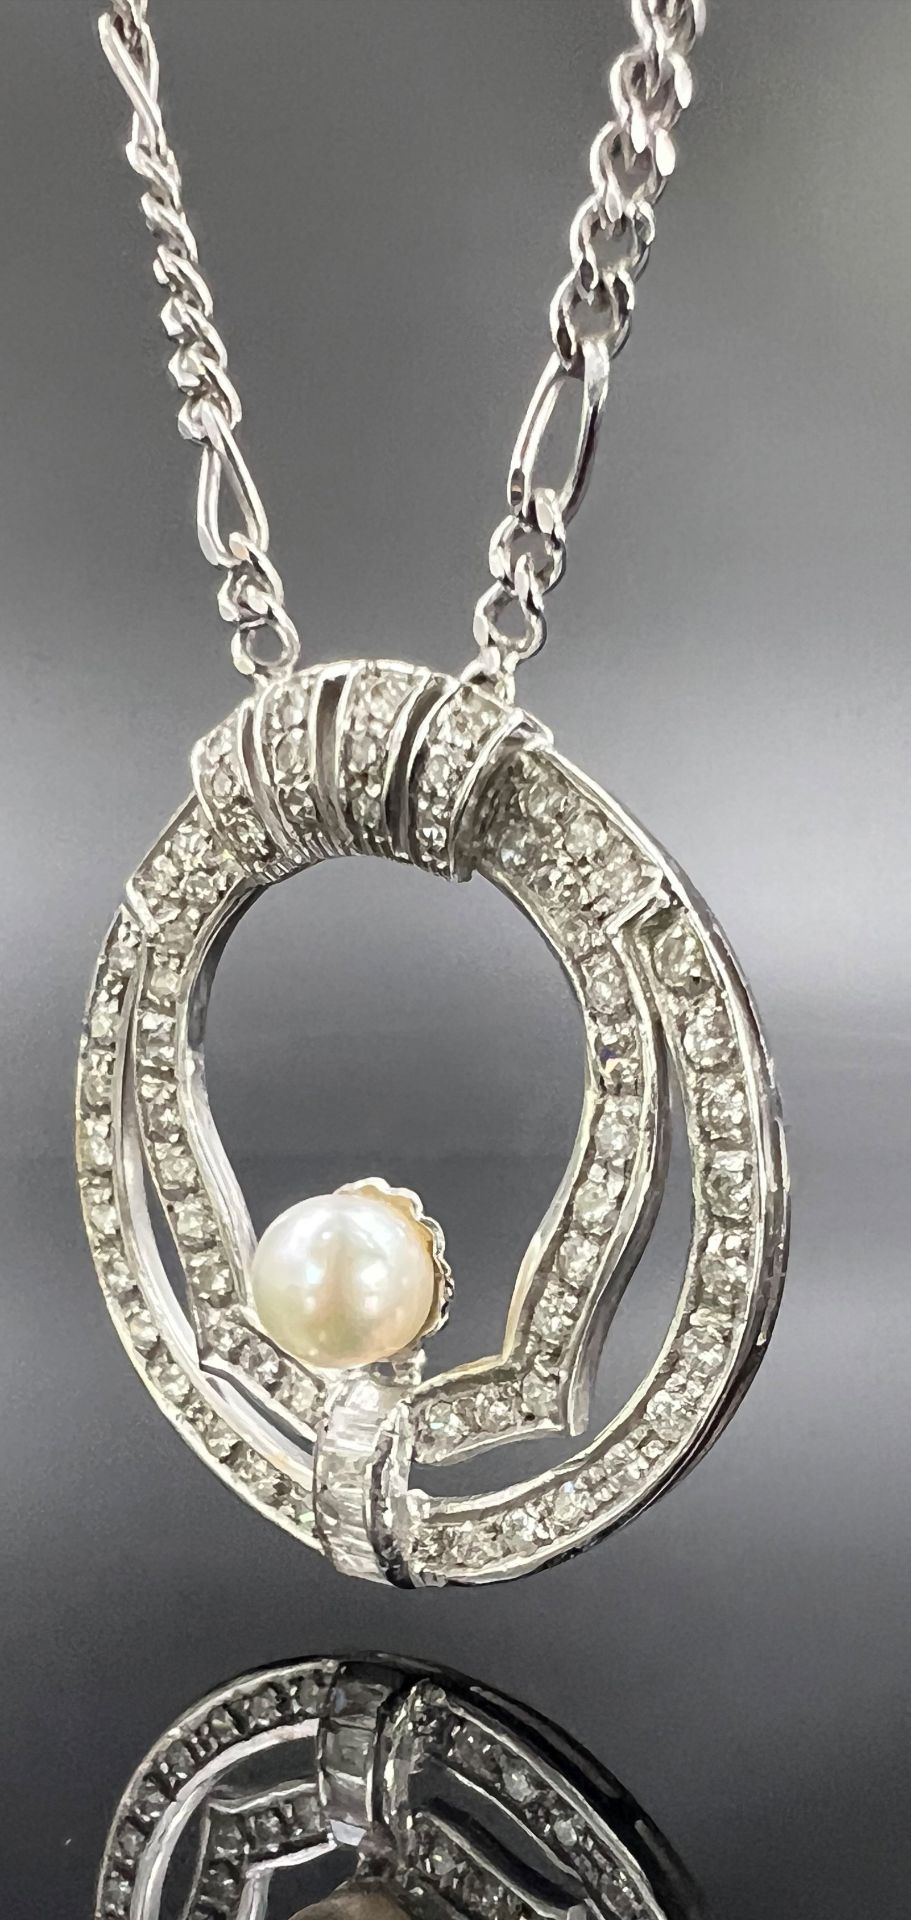 Necklace. 585 white gold with a pearl and diamonds. - Image 3 of 9